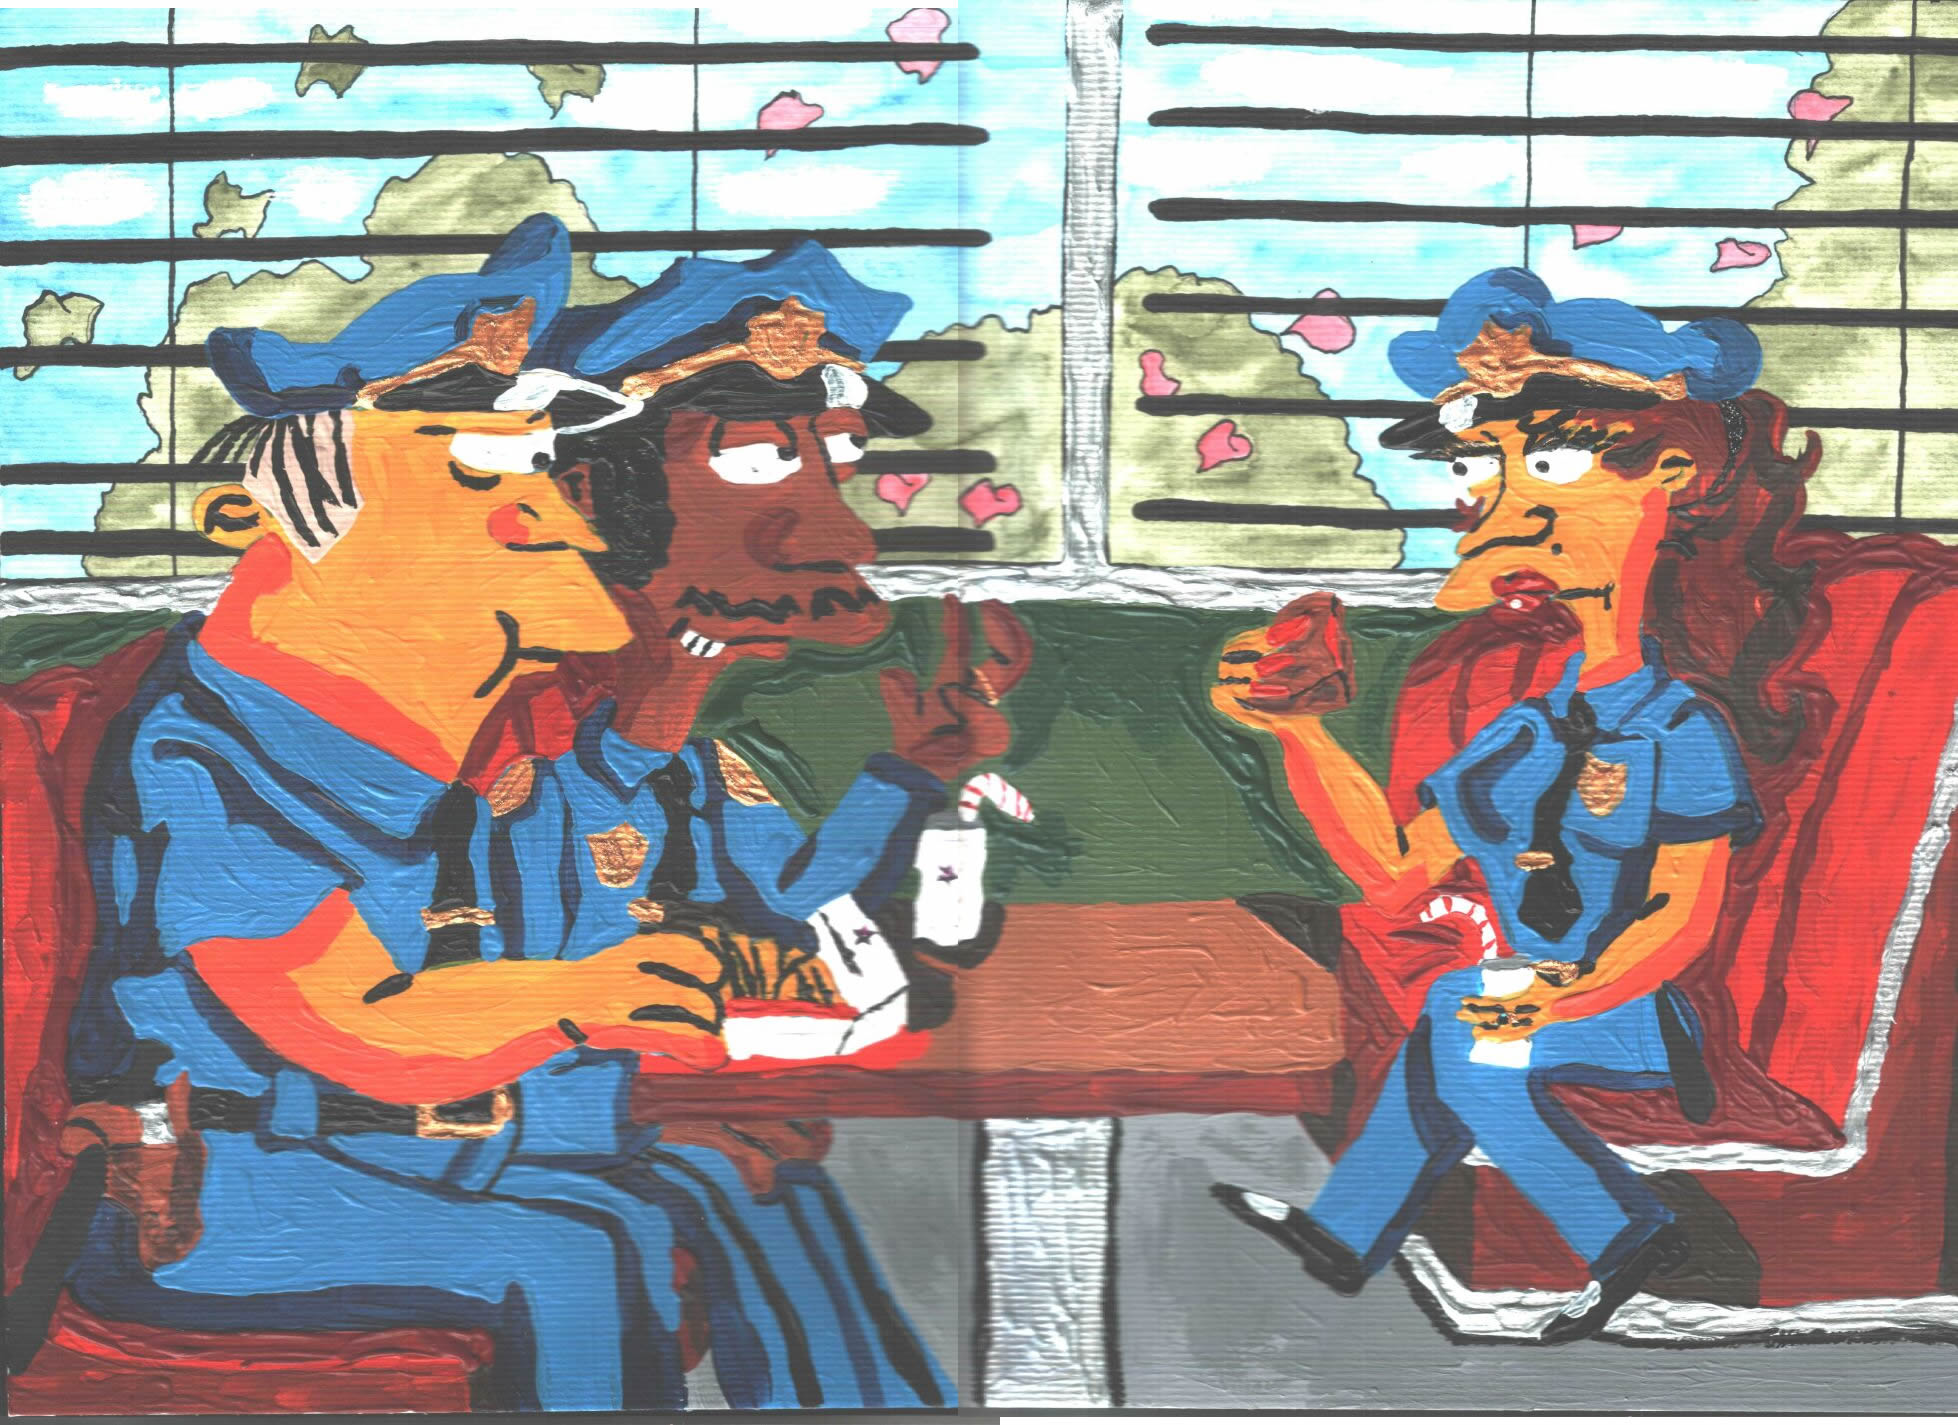 The Cops and me by Marilyn